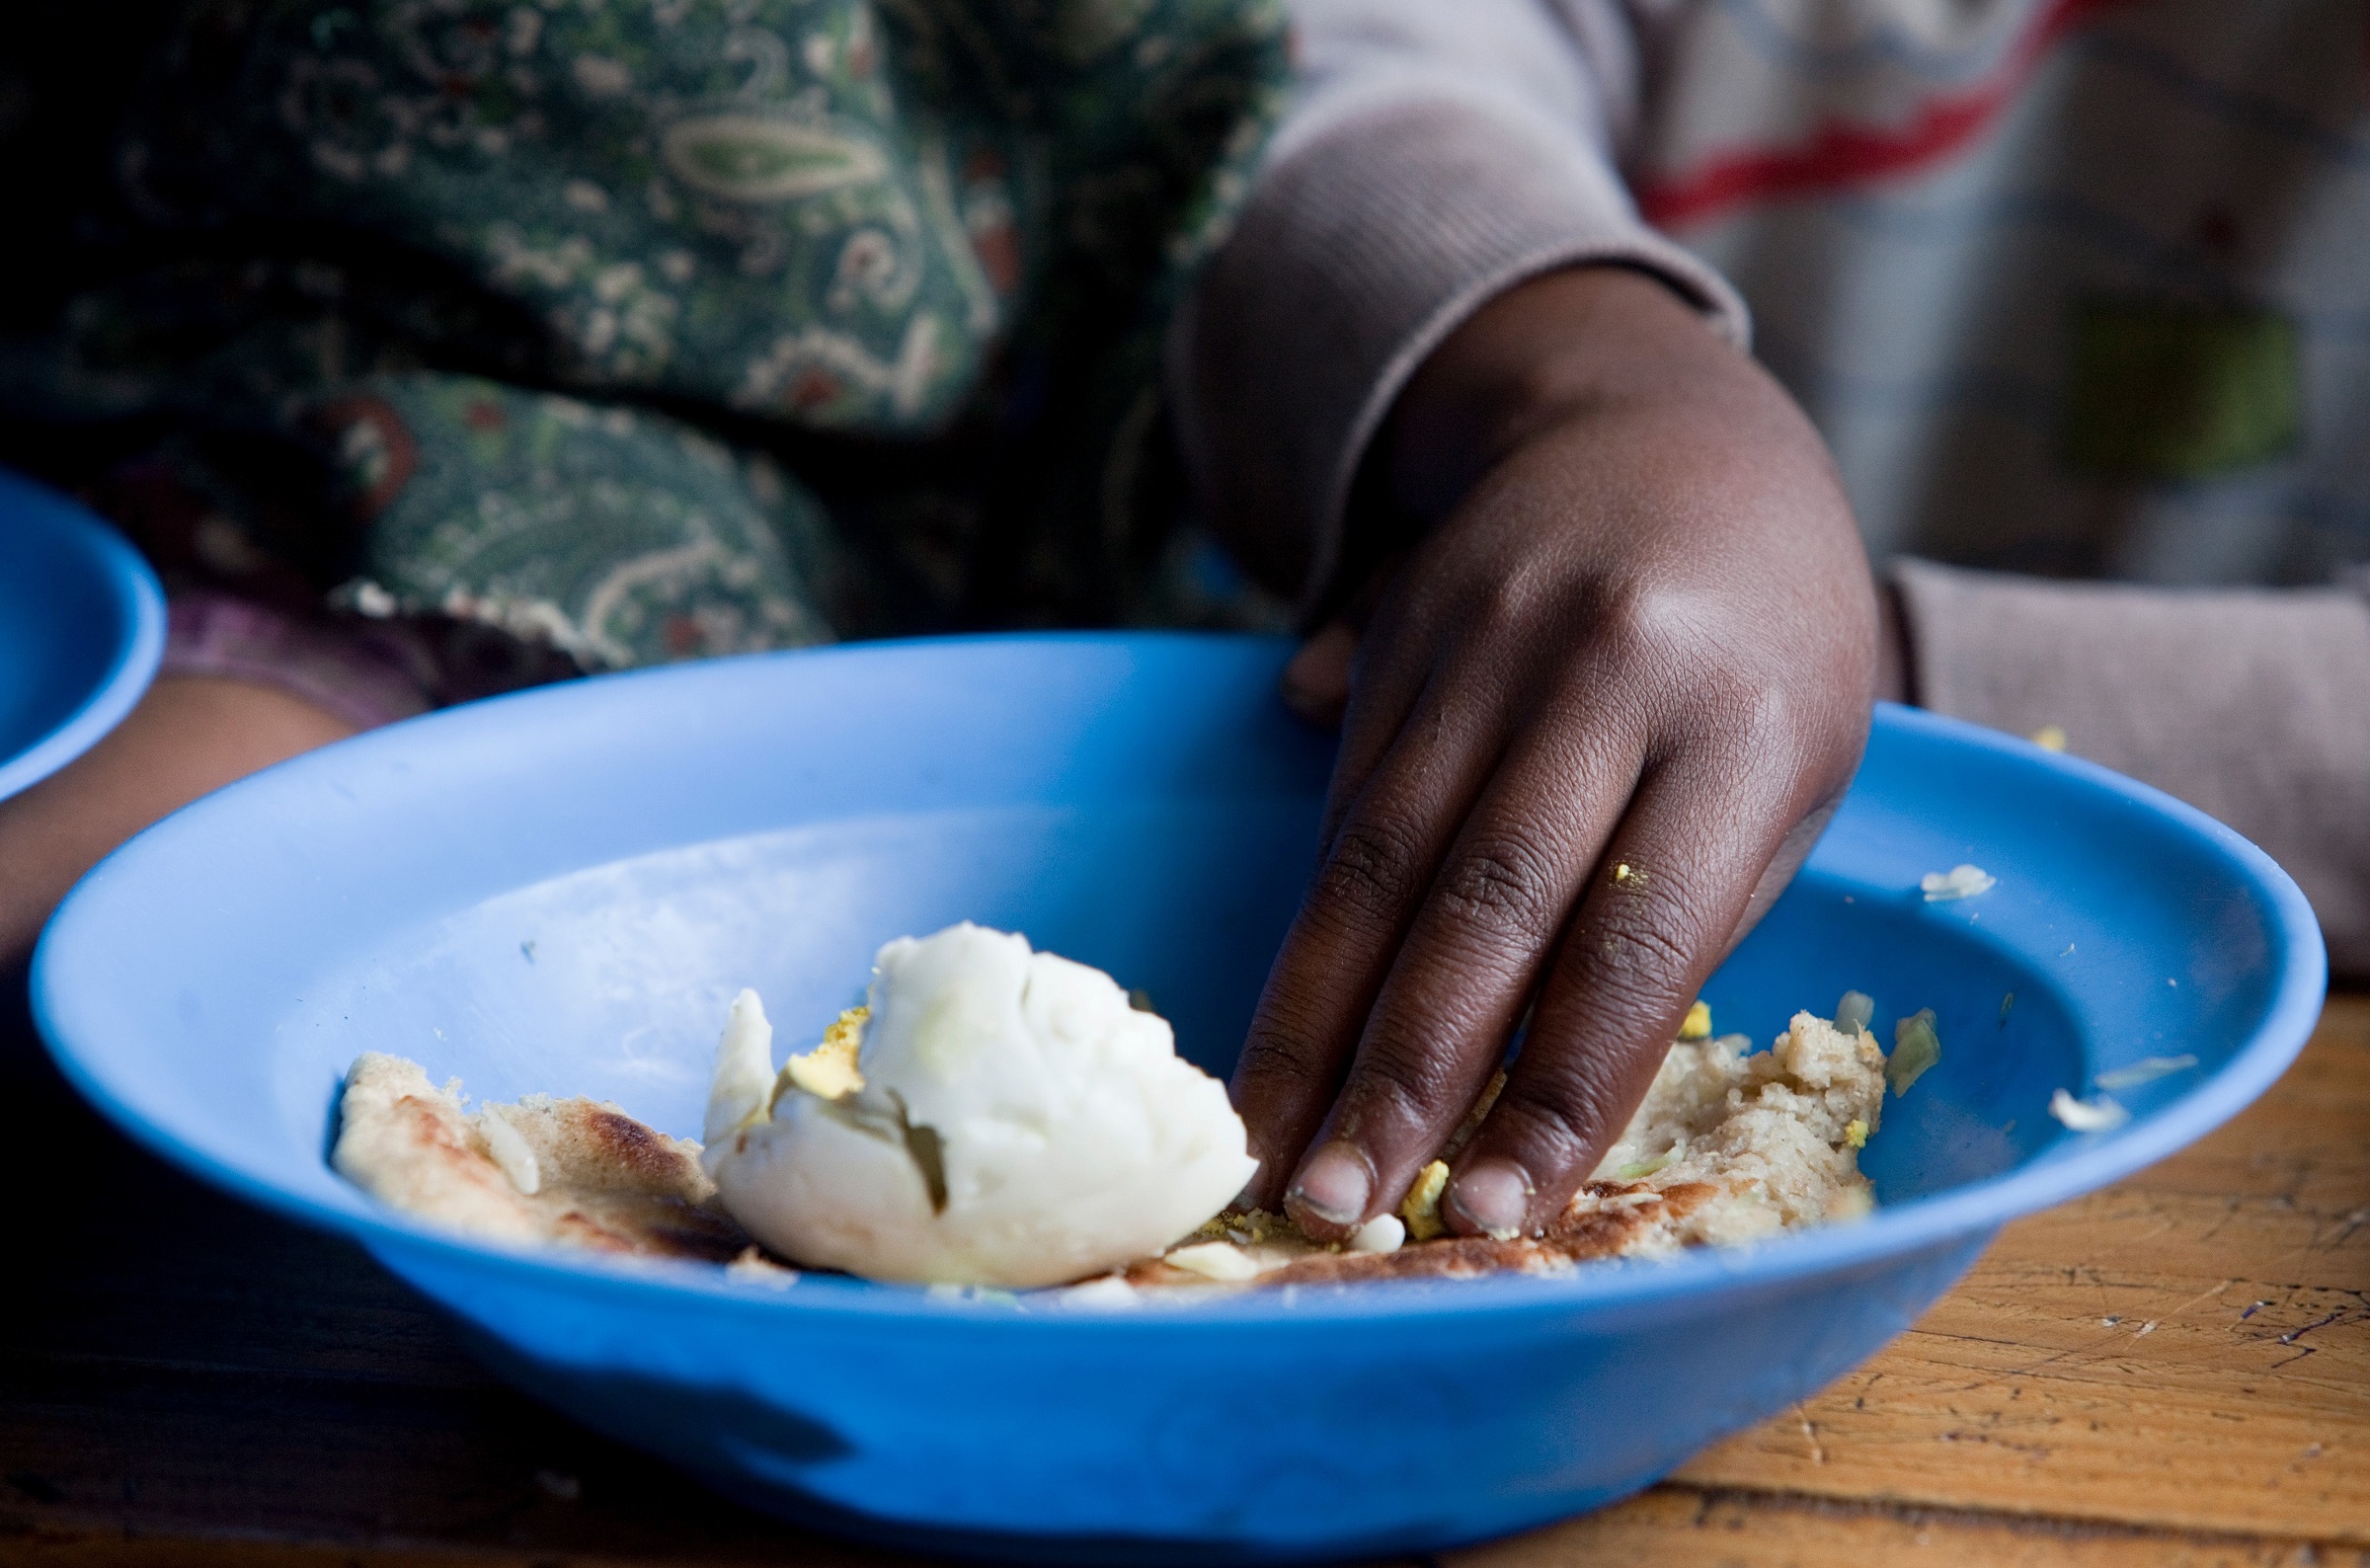 Child's hand picking up food from a deep plate.